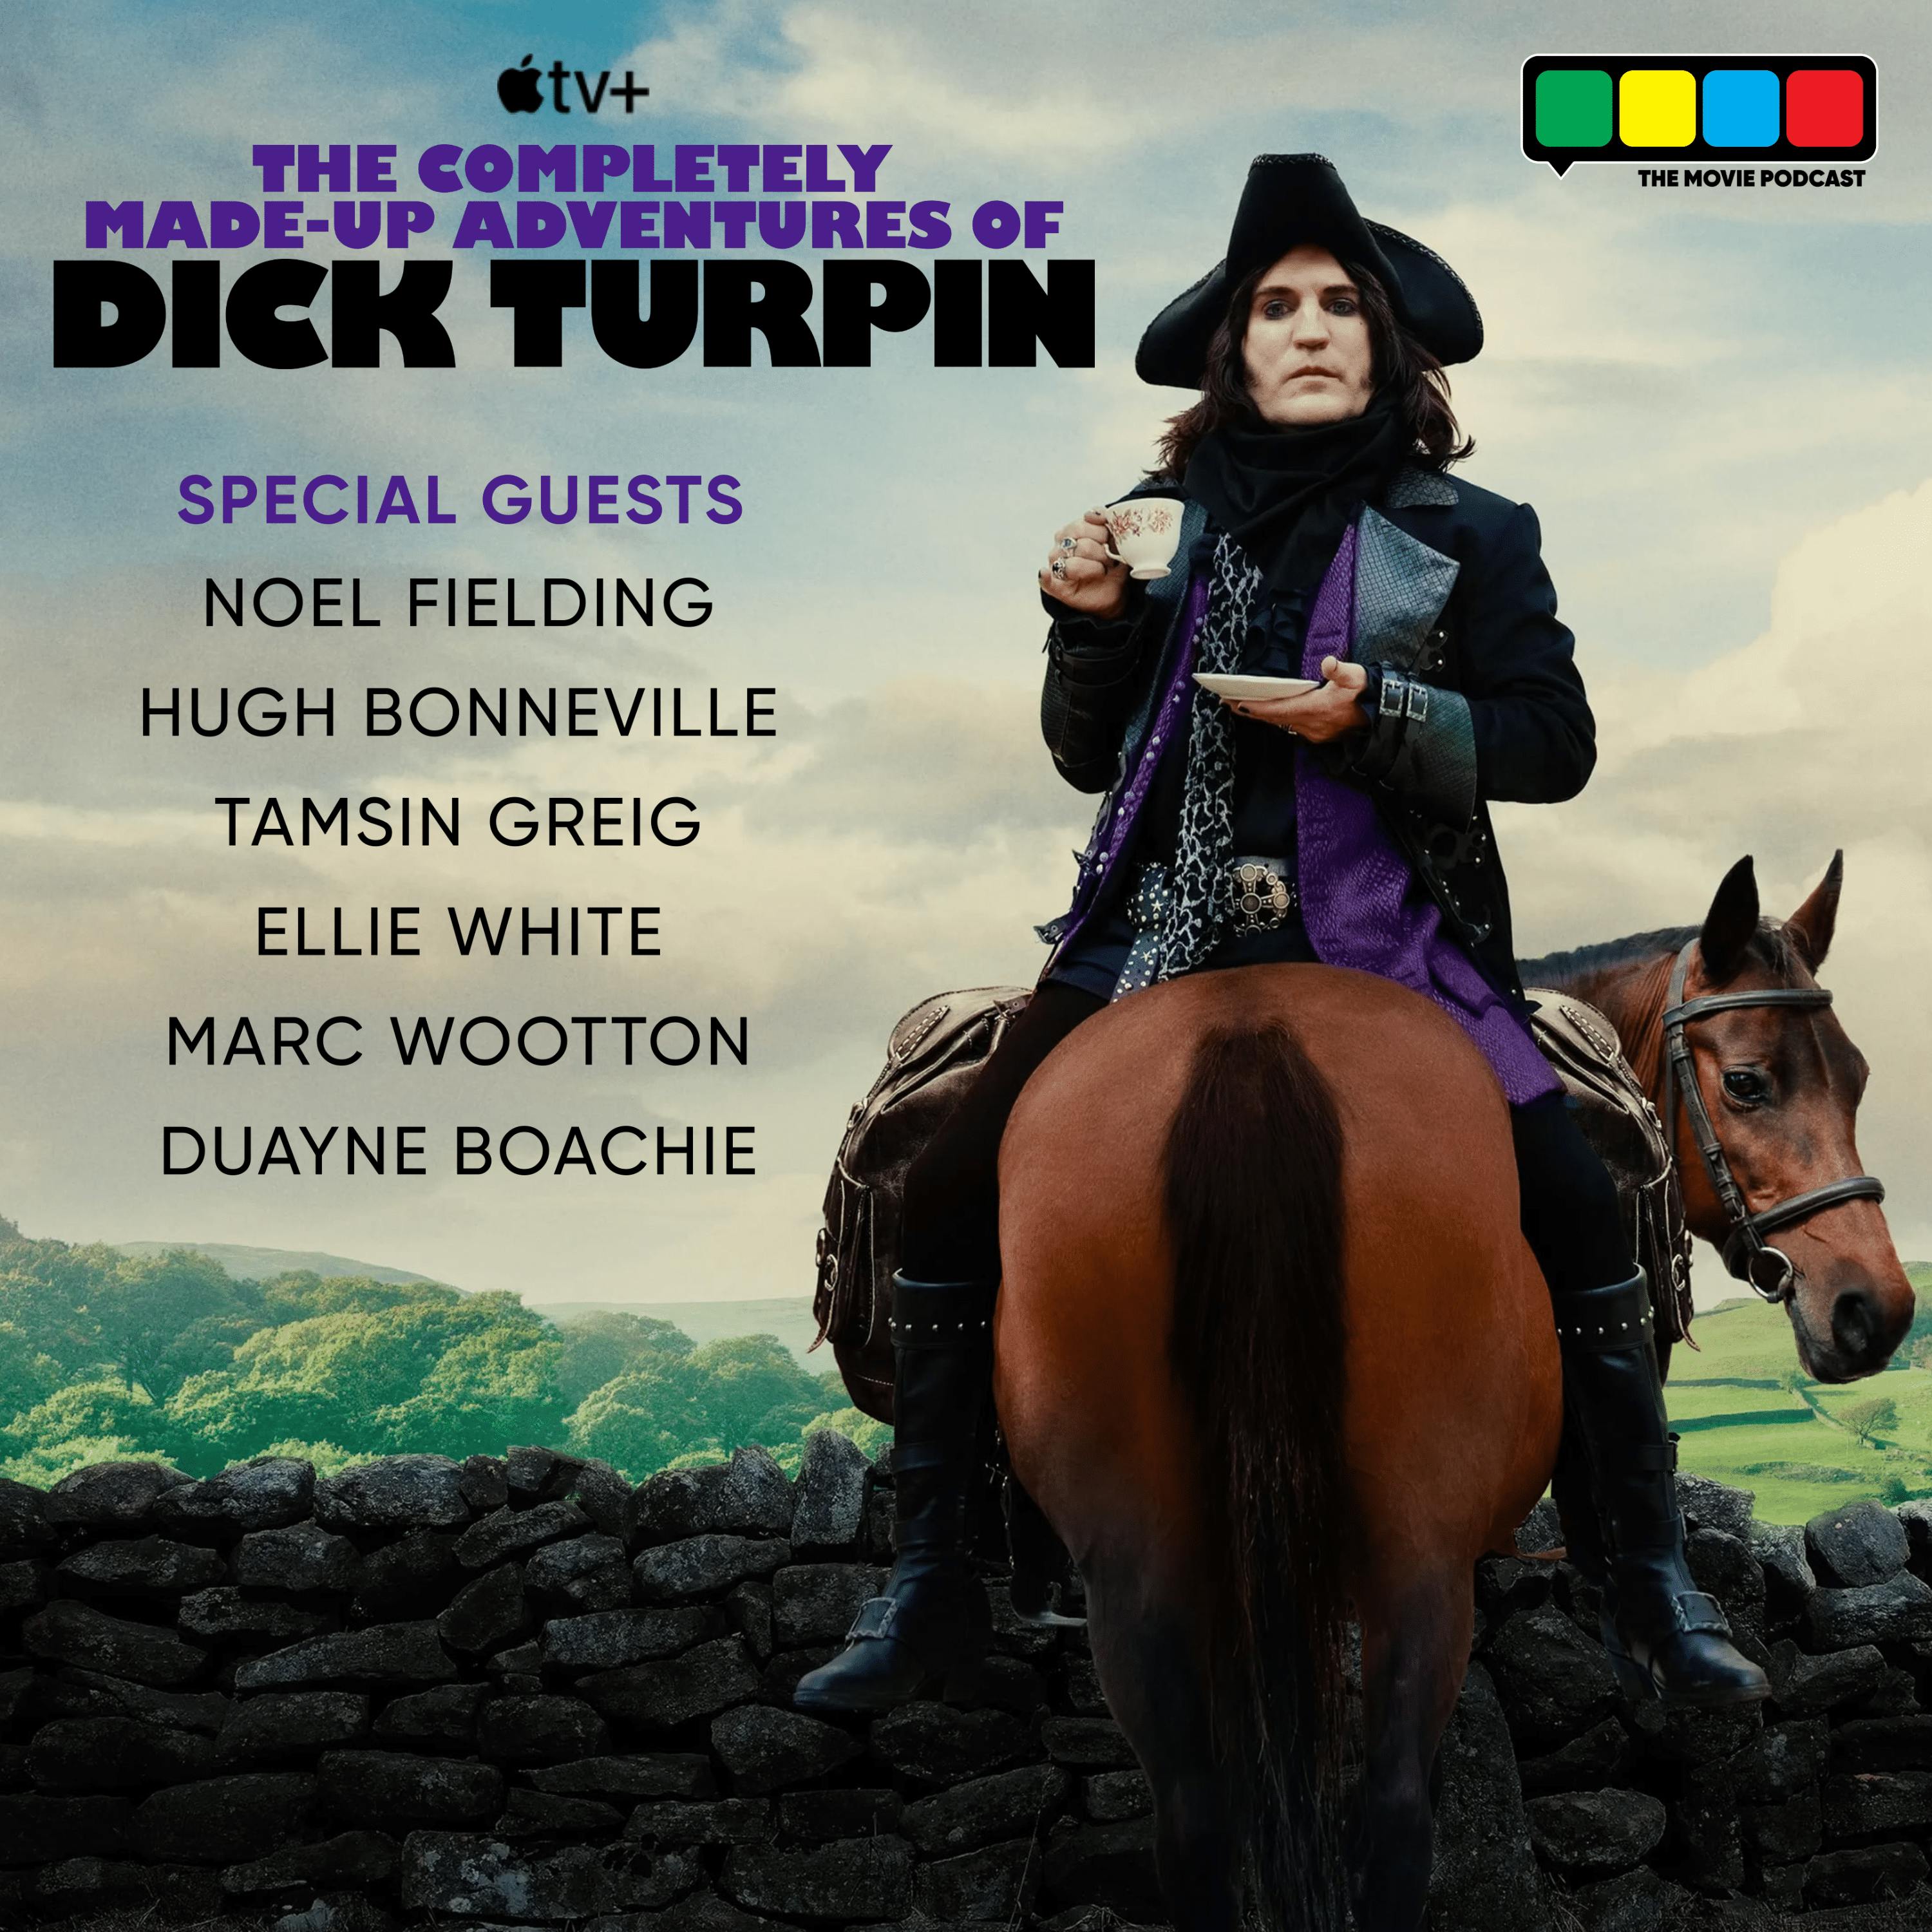 Interview with Noel Fielding, Hugh Bonneville, Tamsin Greig, Ellie White, Marc Wootton, & Duayne Boachie of The Completely Made Up Adventures of Dick Turpin (Apple TV+)